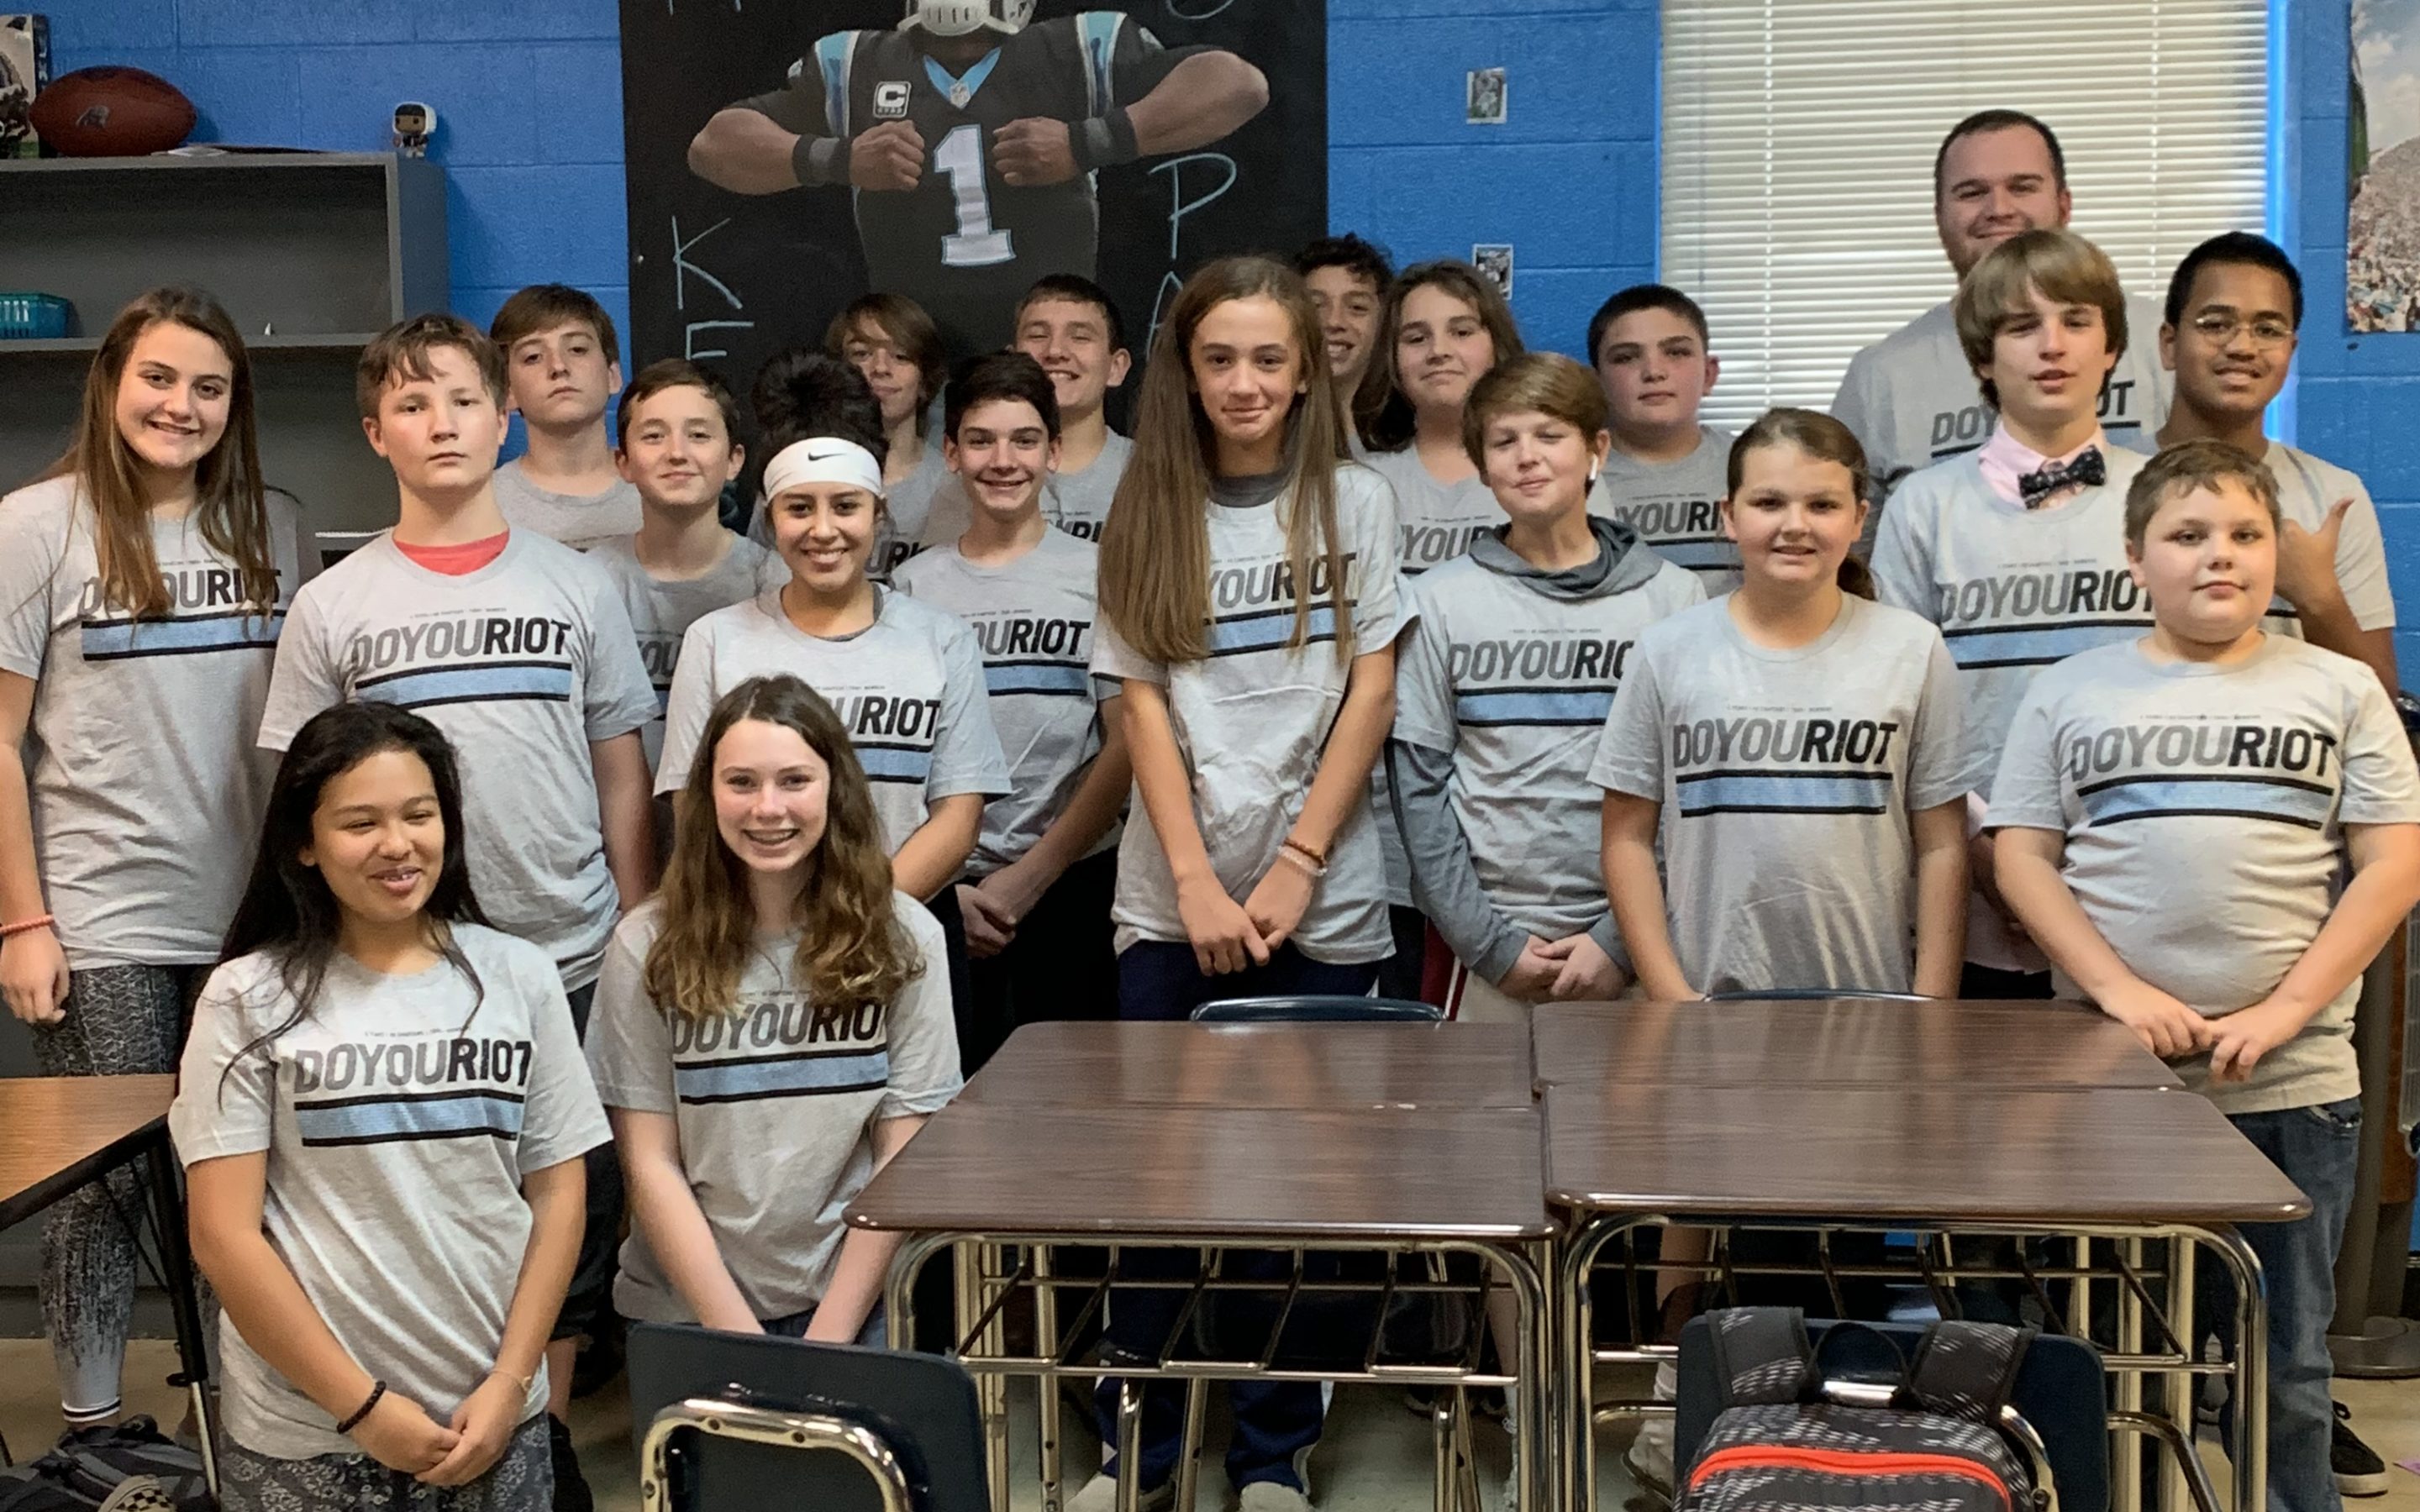 Meet The Latest Chapter of the Roaring Riot: Erwin Middle School